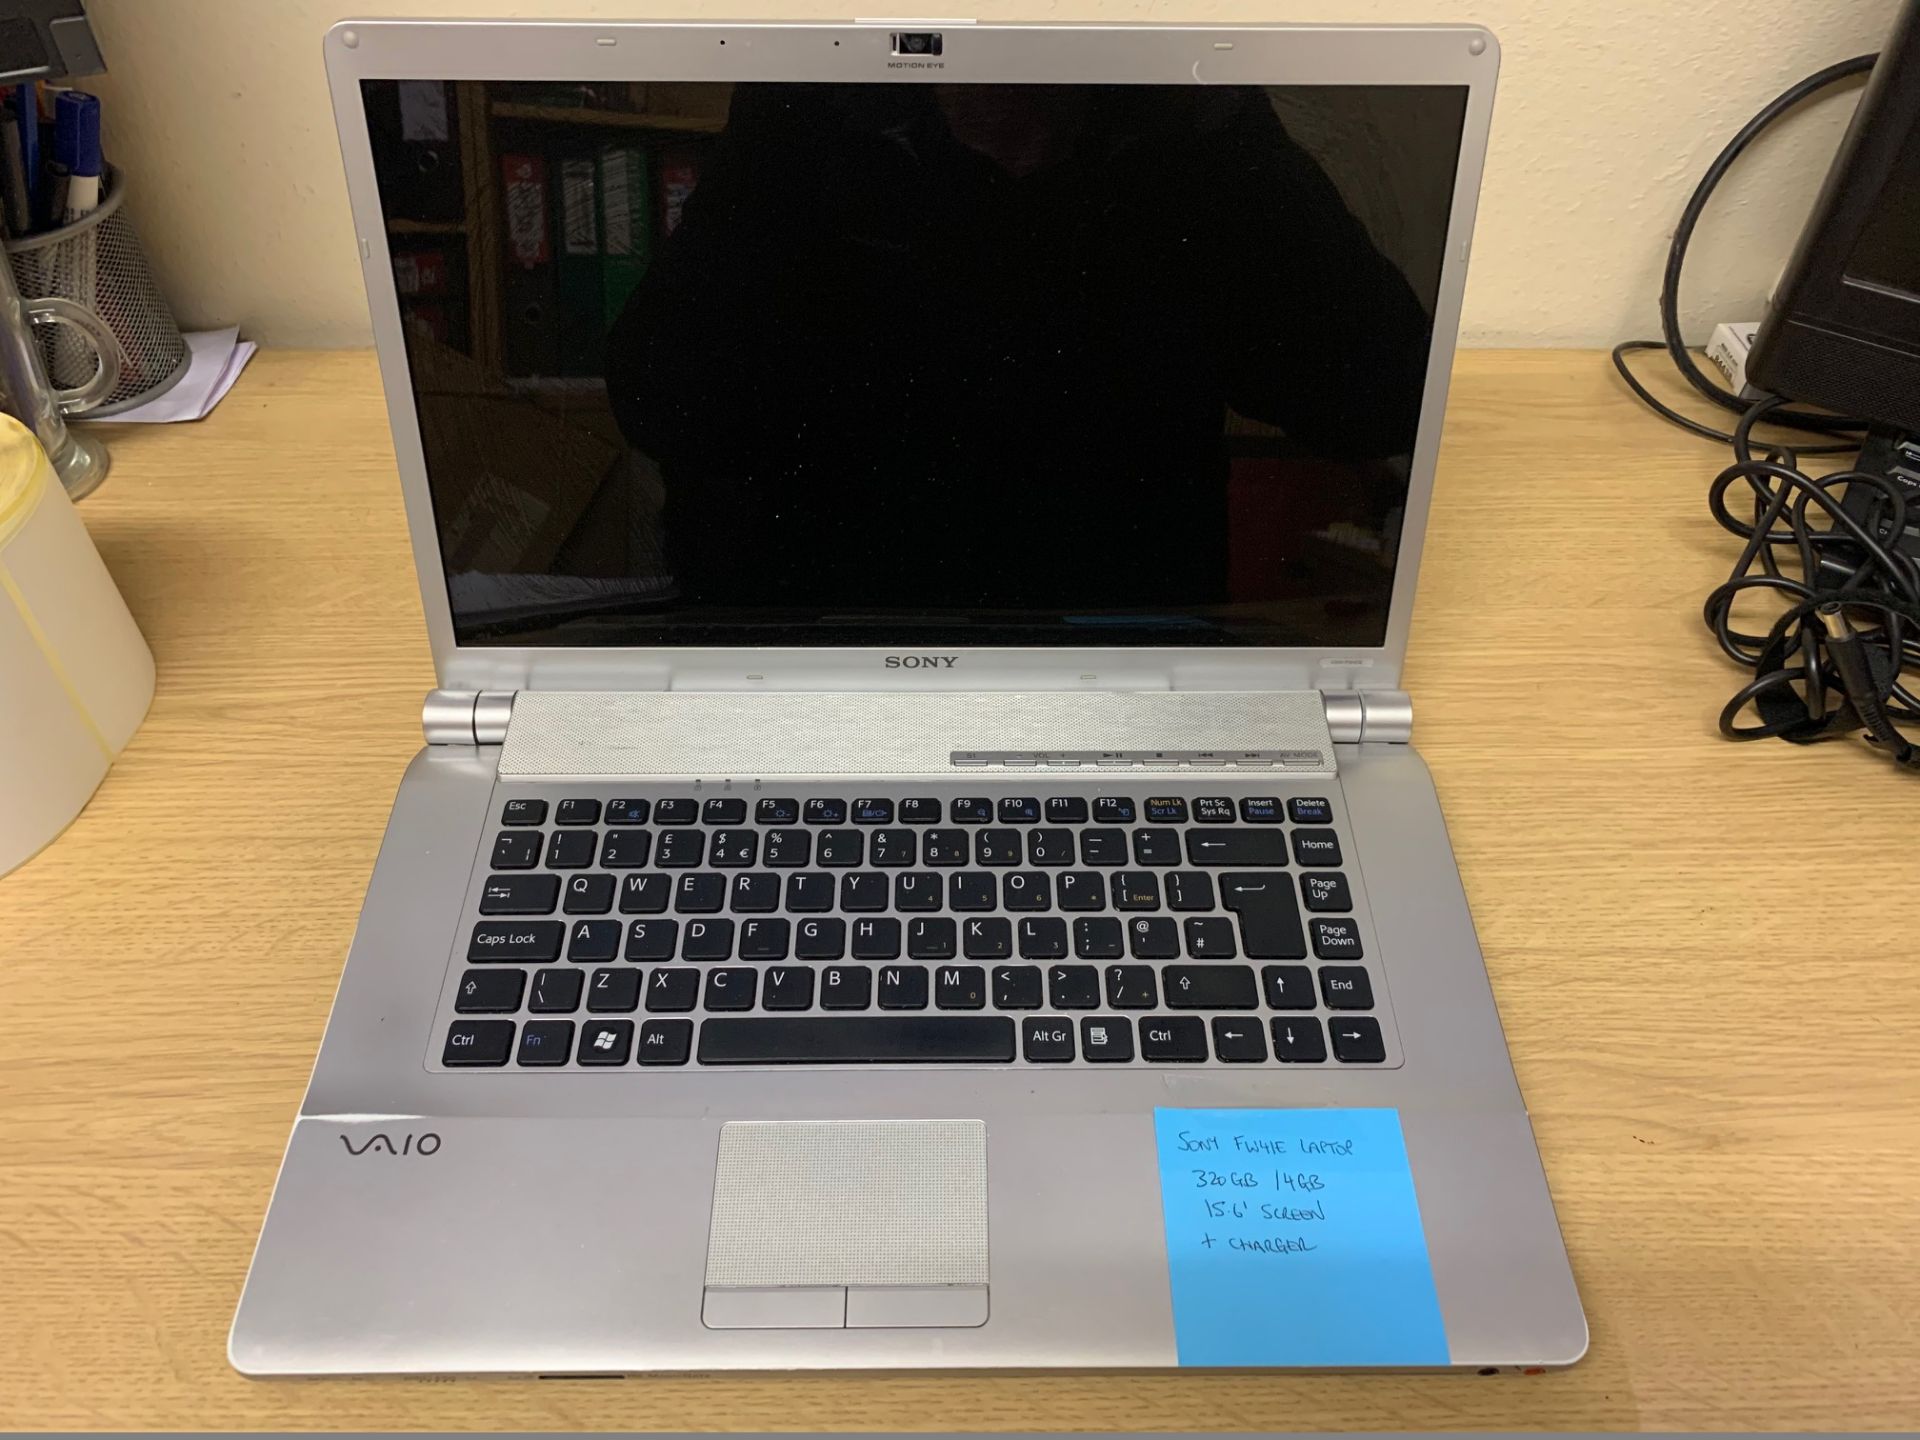 Sony Vaio FW41E Laptop - 320GB Hard Drive, 4GB RAM, 15.6" Screen, Loaded With Windows 7 & Complete - Image 2 of 4